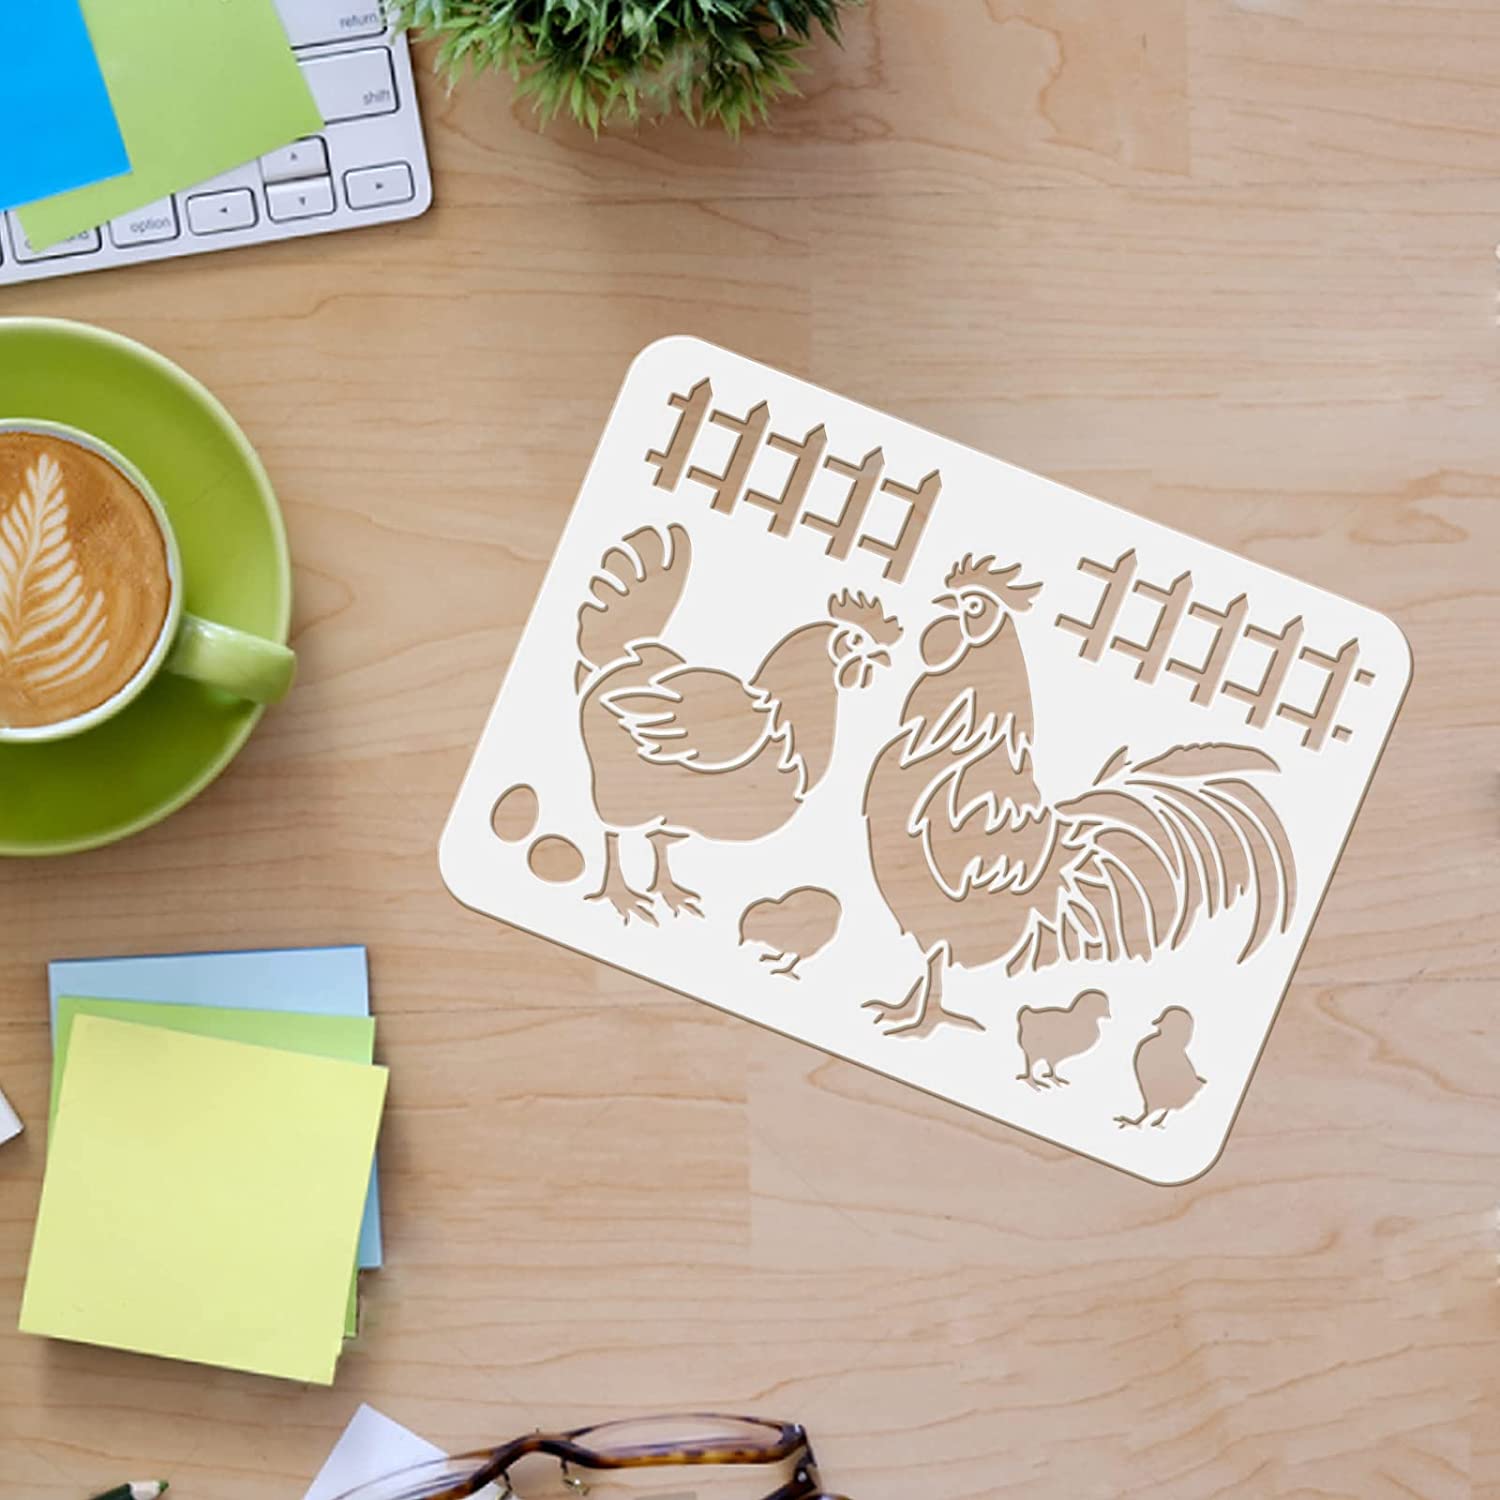 Farmhouse Stencils, 6 Pcs Farm Animals Theme Reusable Stencils for Painting  on Wood, Cow Sunflowers Bee Pig Sheep Hen Chicken Egg Stencils for Drawing